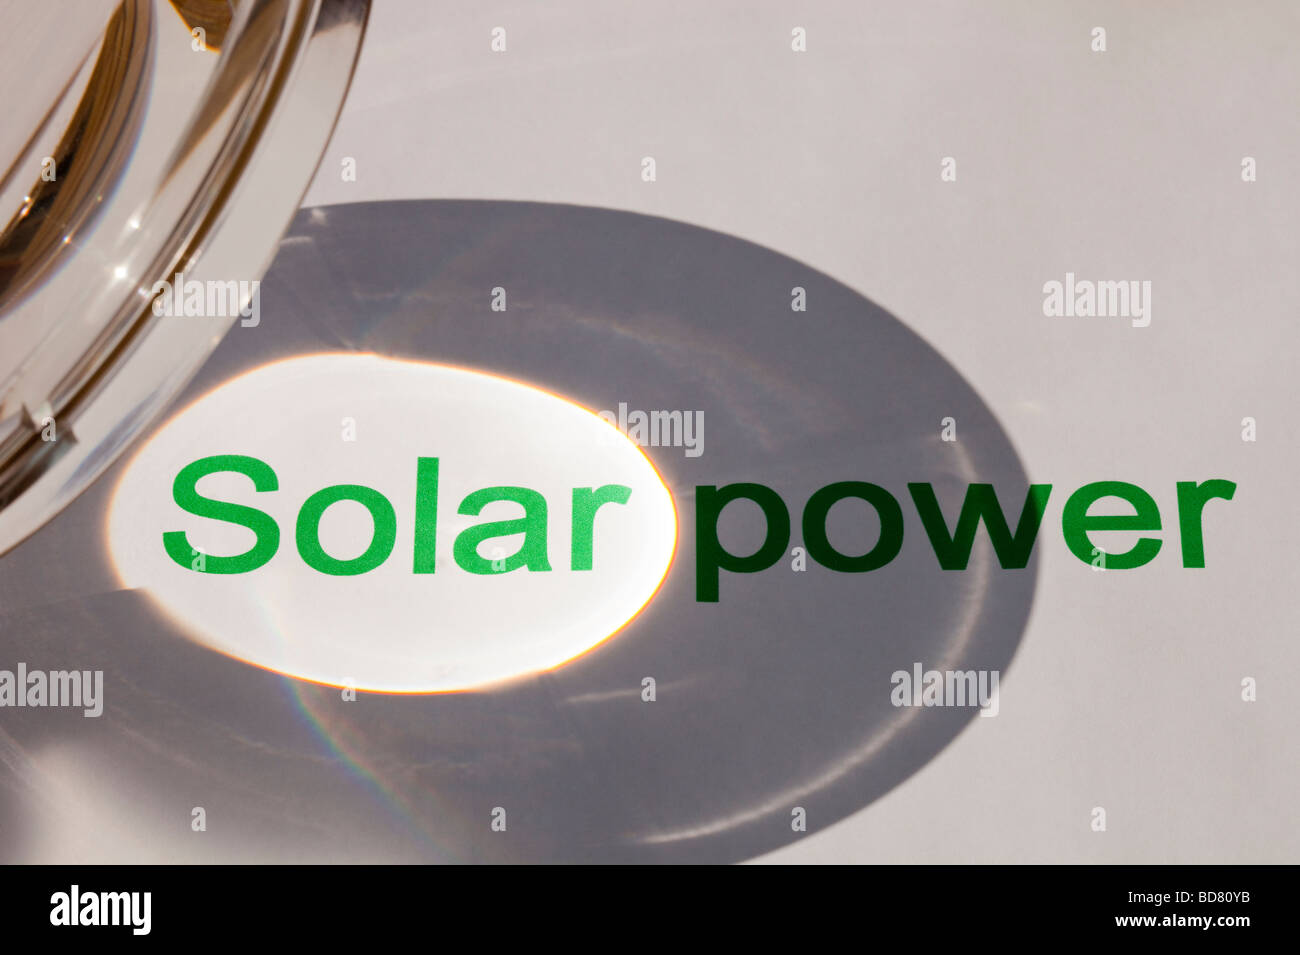 Solar power concentrating the suns power through a magnfying glass Stock Photo